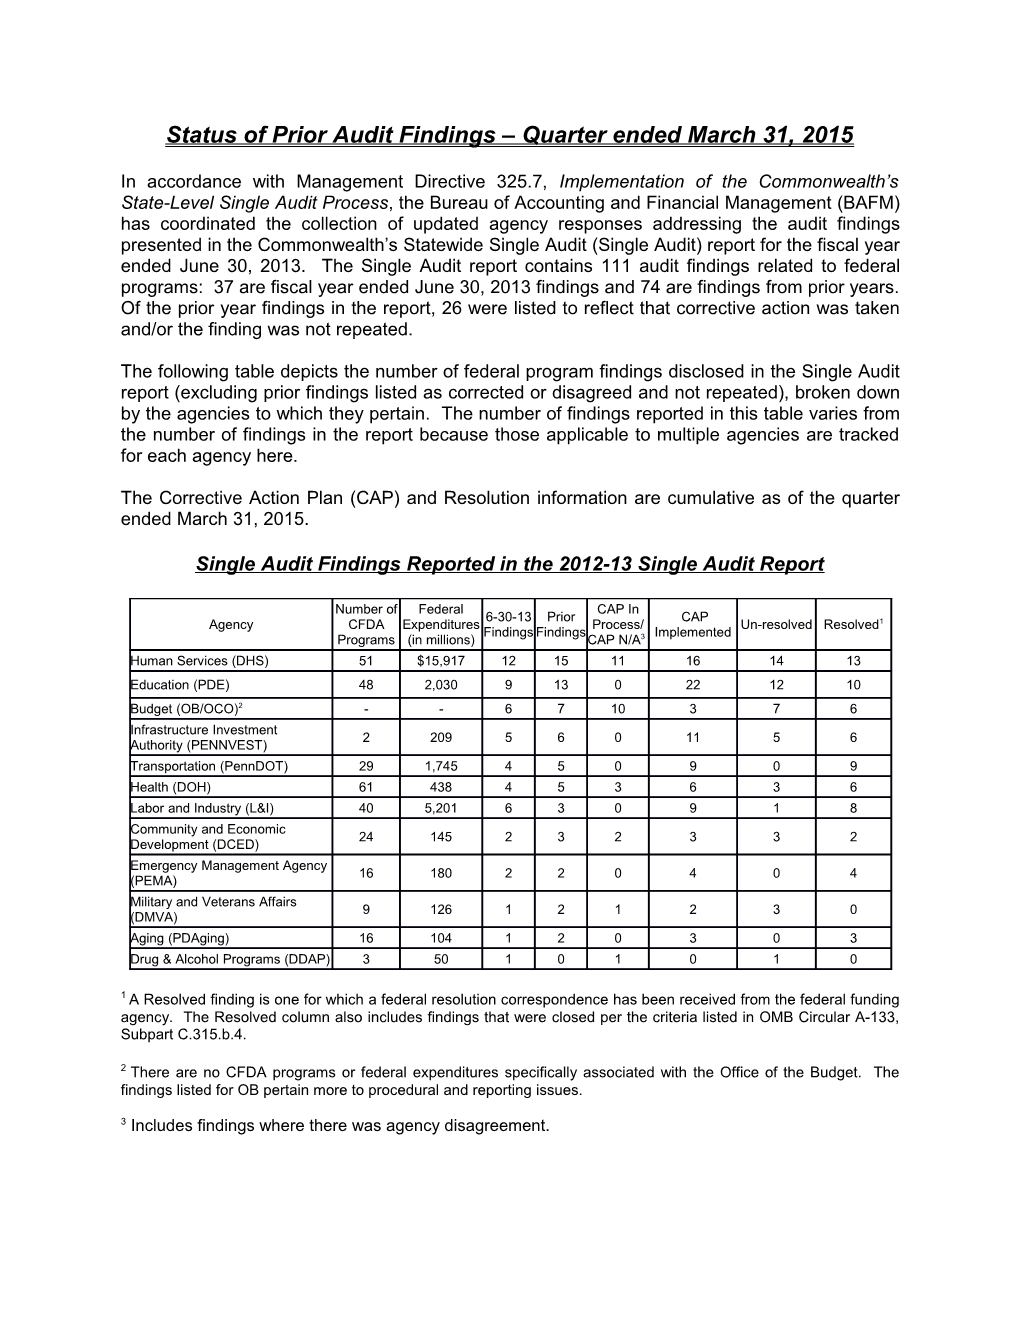 March 31, 2015 Report on Prior Single Audit Findings